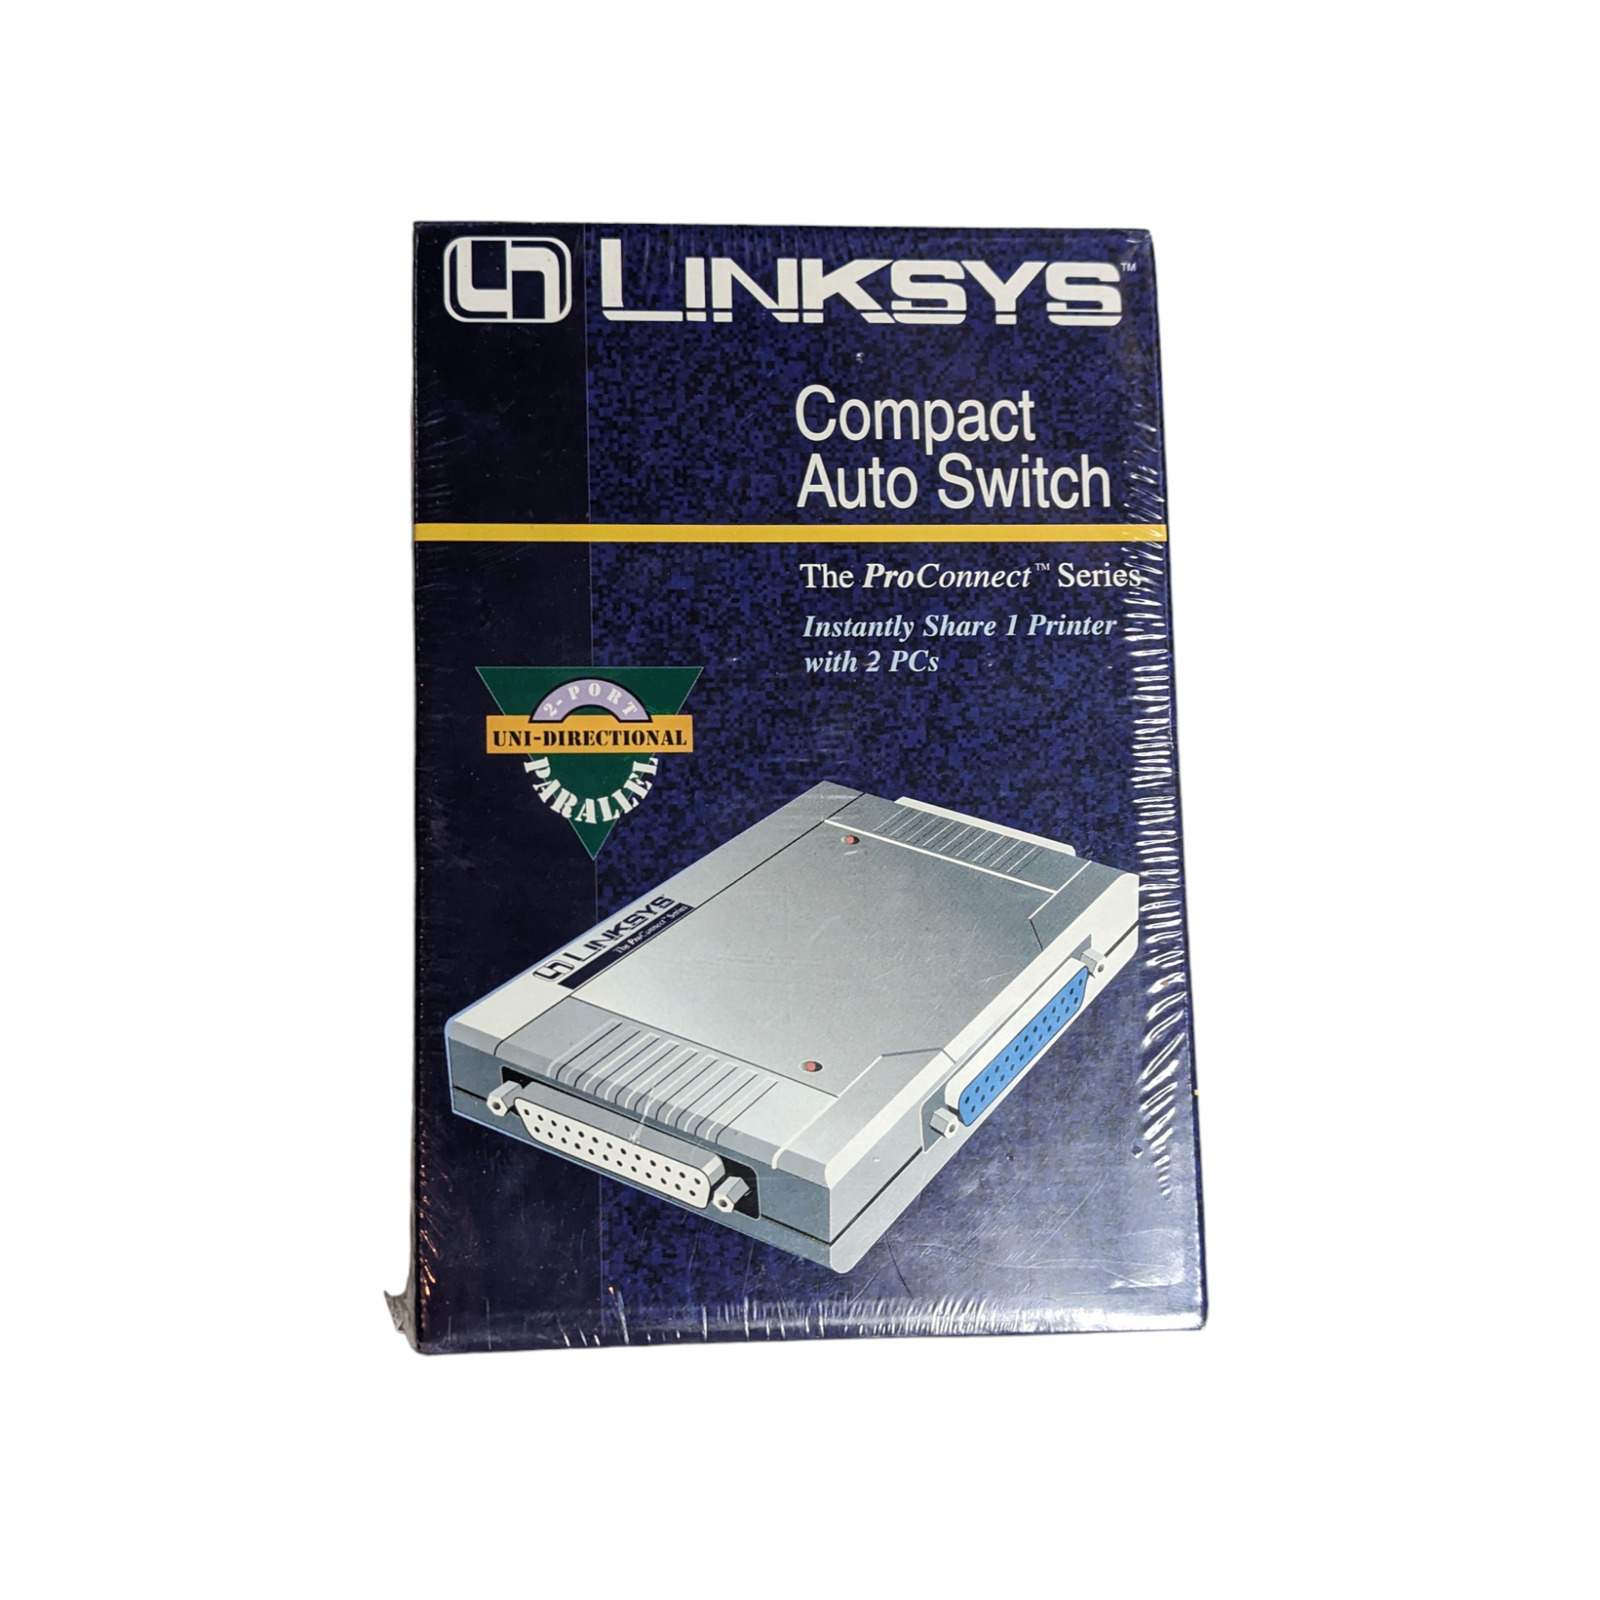 New/Sealed Linksys Compact Auto Switch PASU221 2-Port ProConnect Series